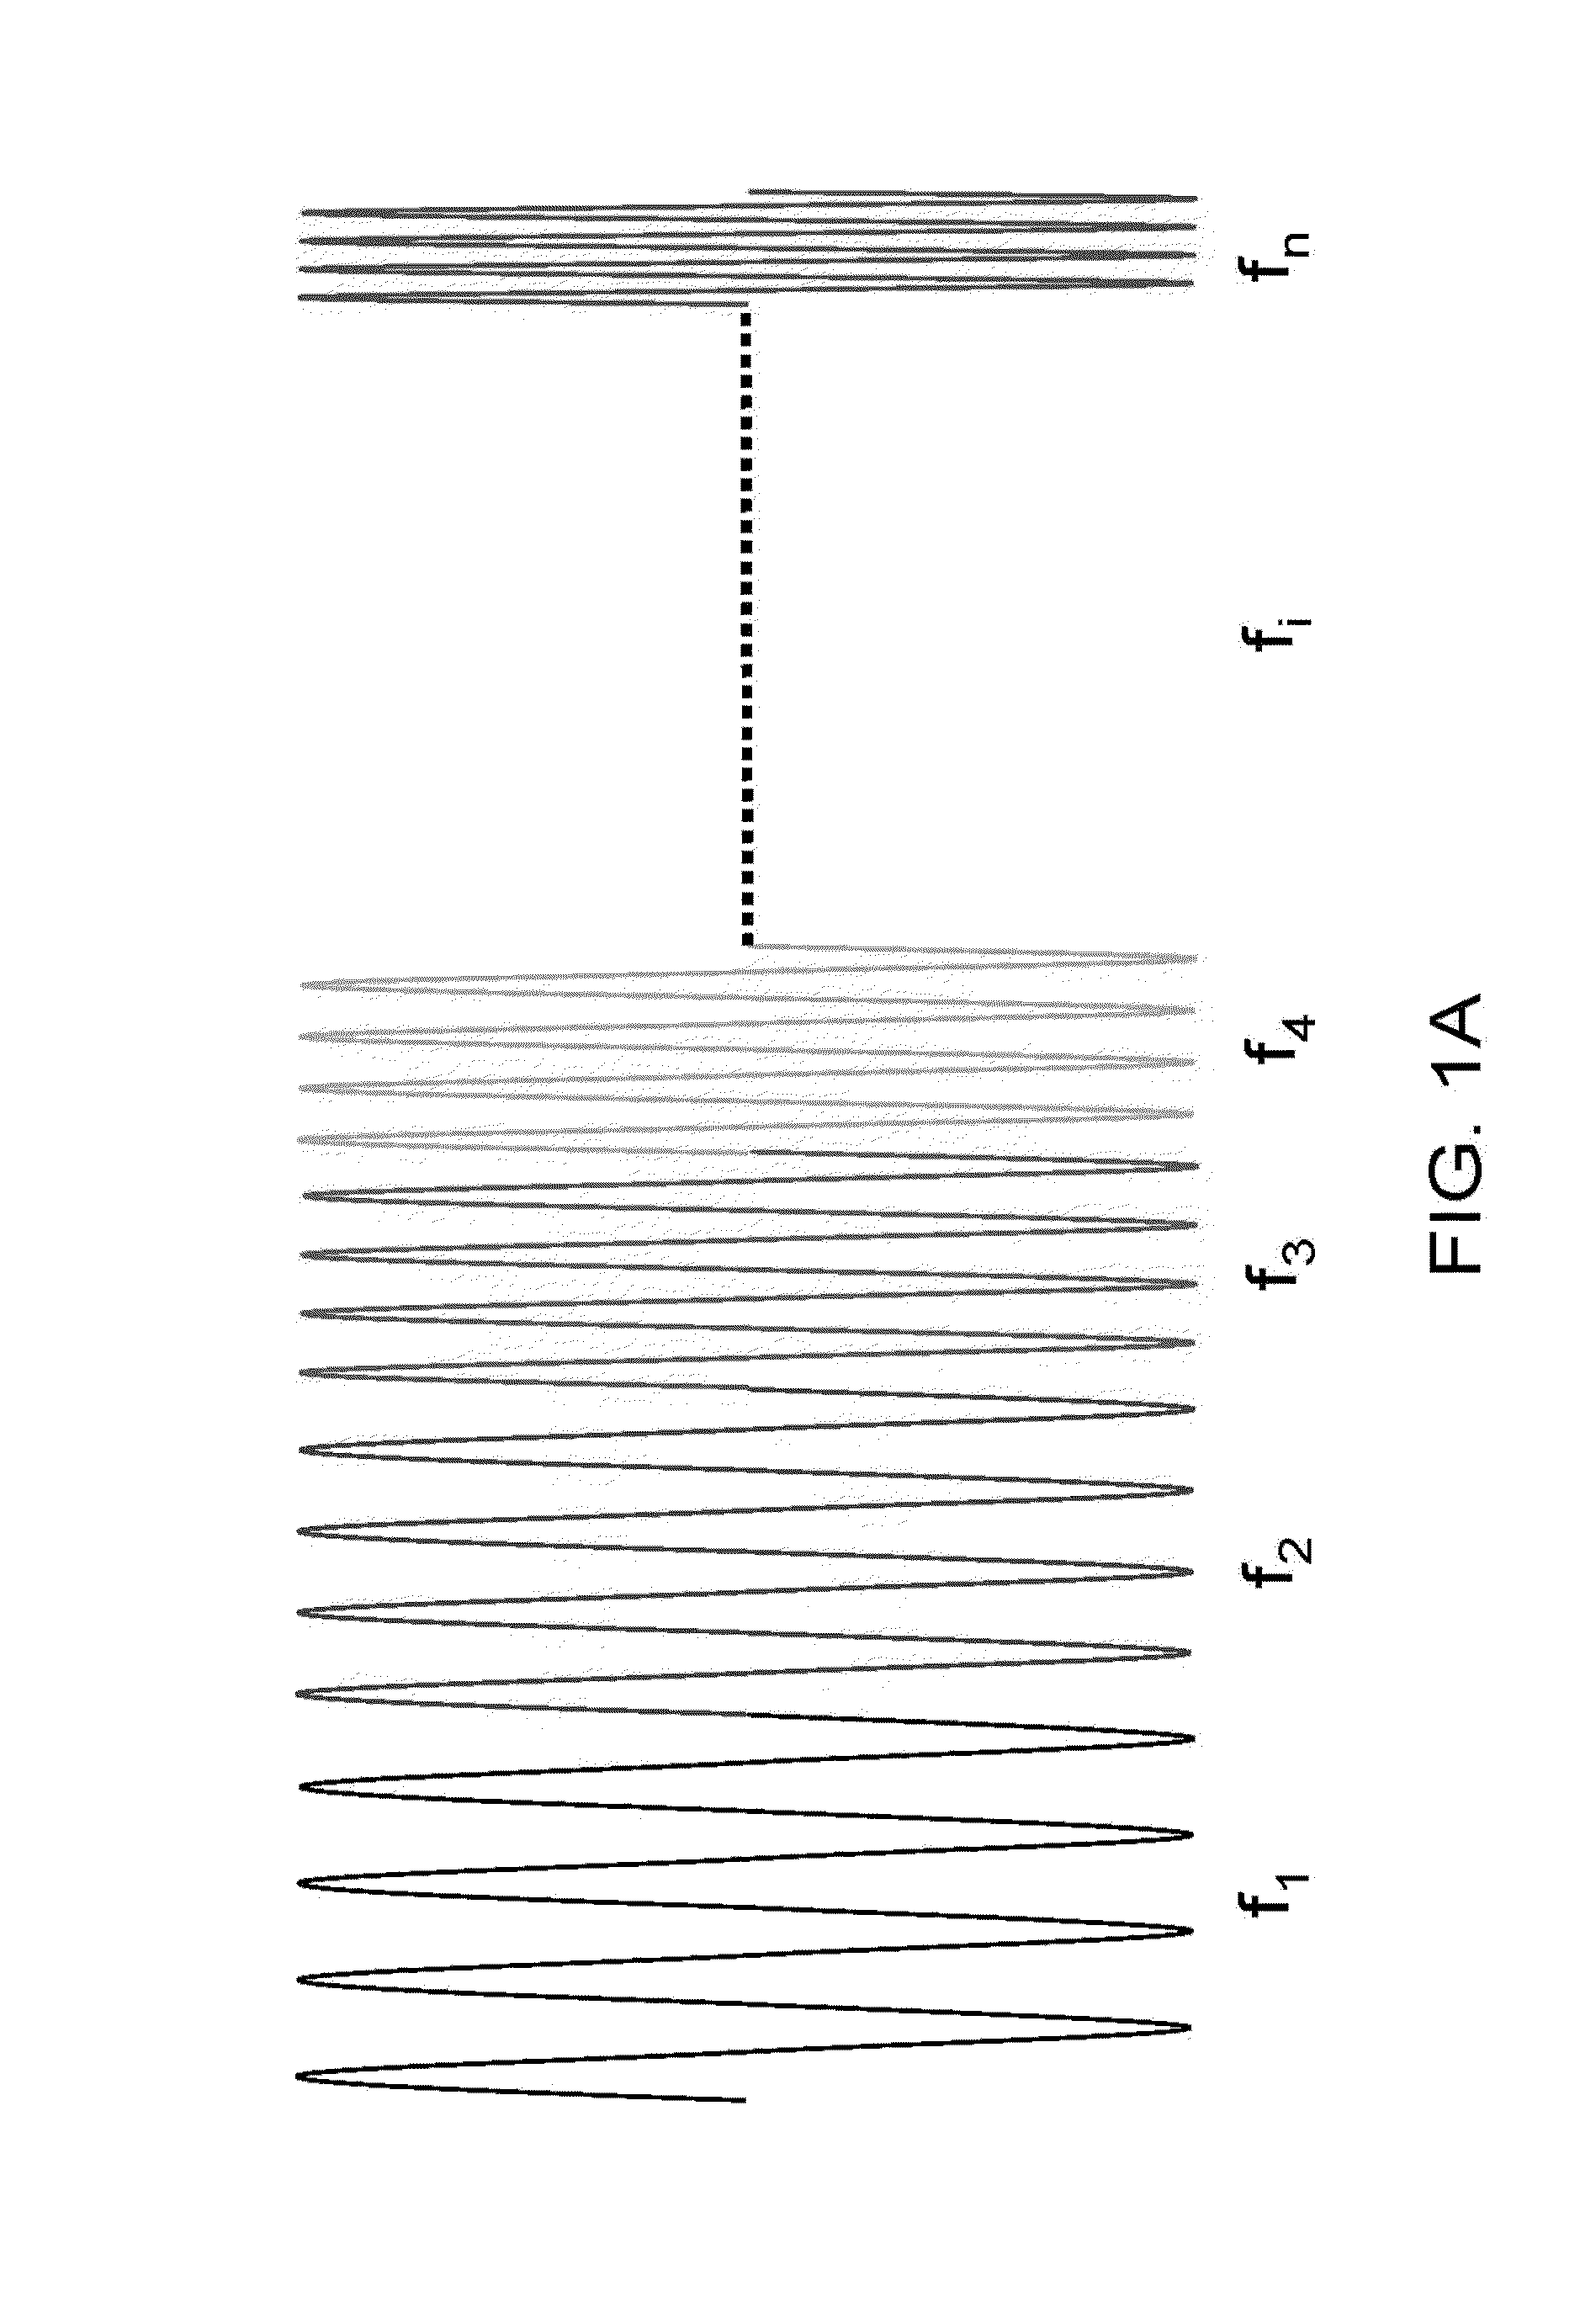 Methods and system for multi-path mitigation in tracking objects using reduced attenuation RF technology